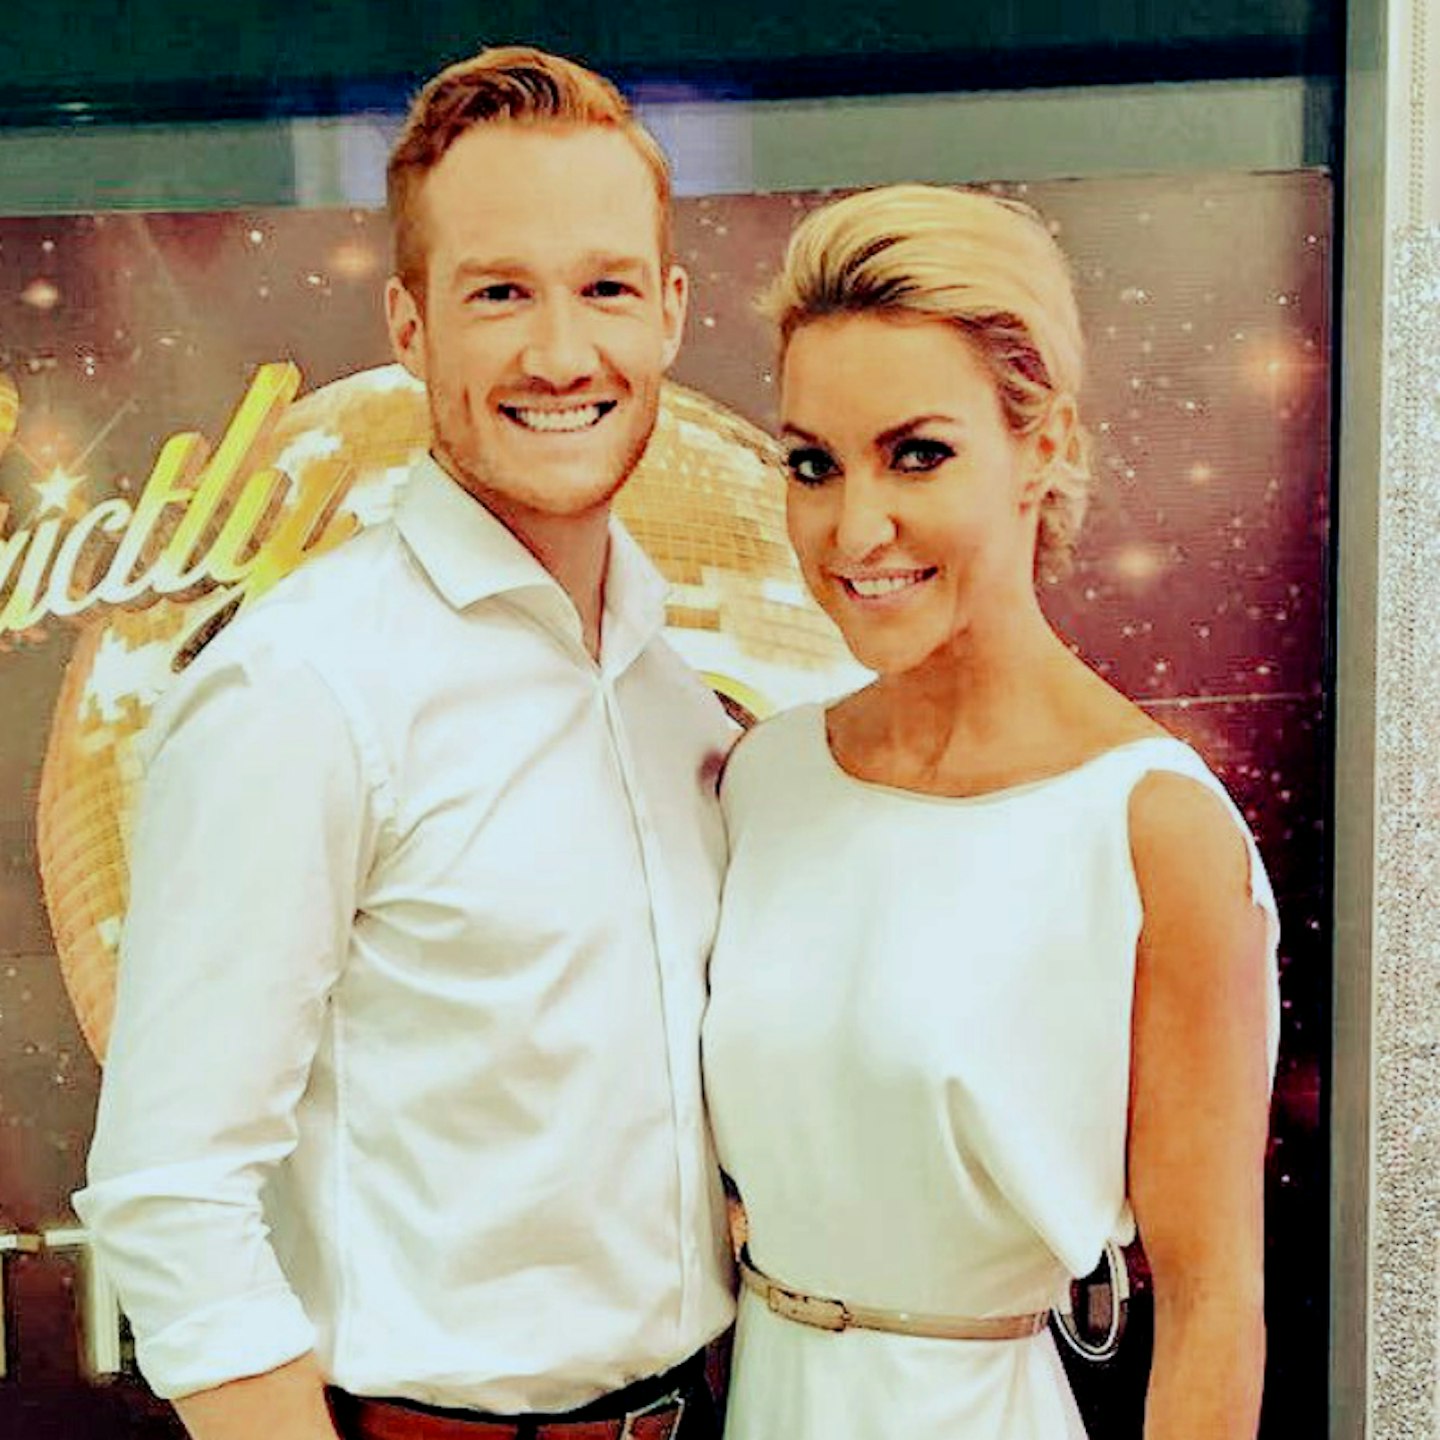 natalie-lowe-quit-strictly-come-dancing-leaving-show